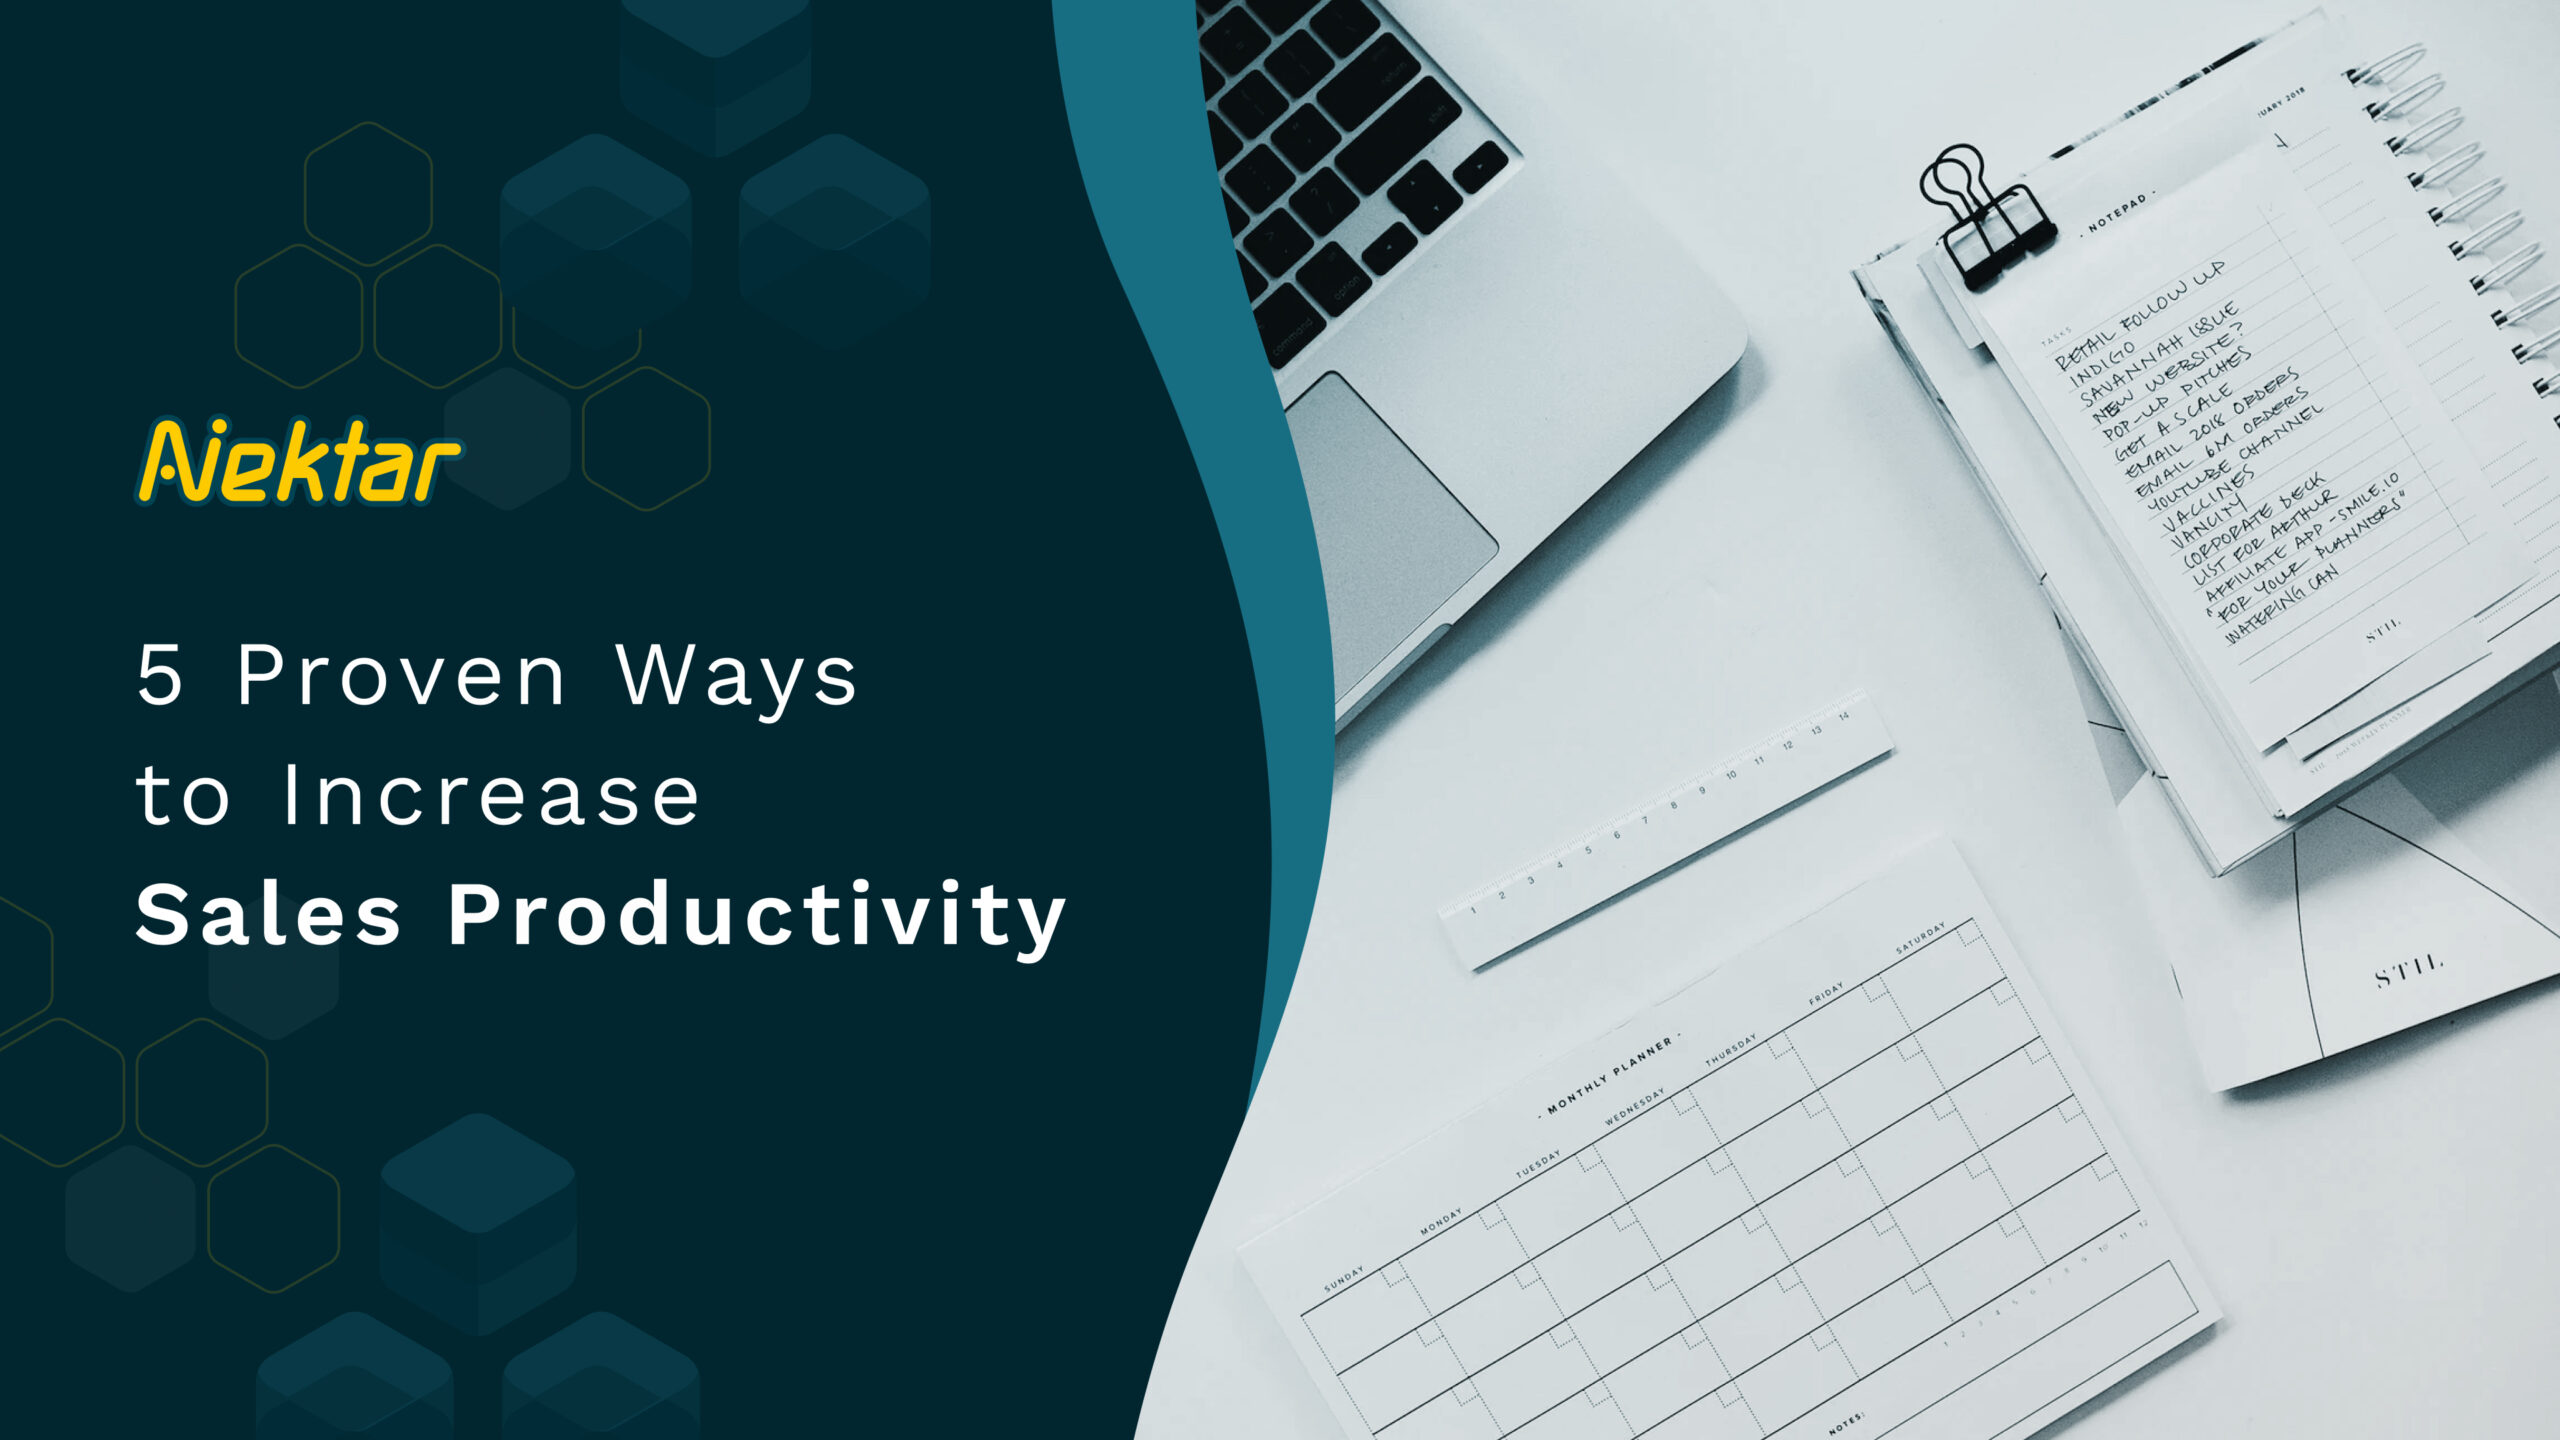 5 Proven Ways to Increase Sales Productivity